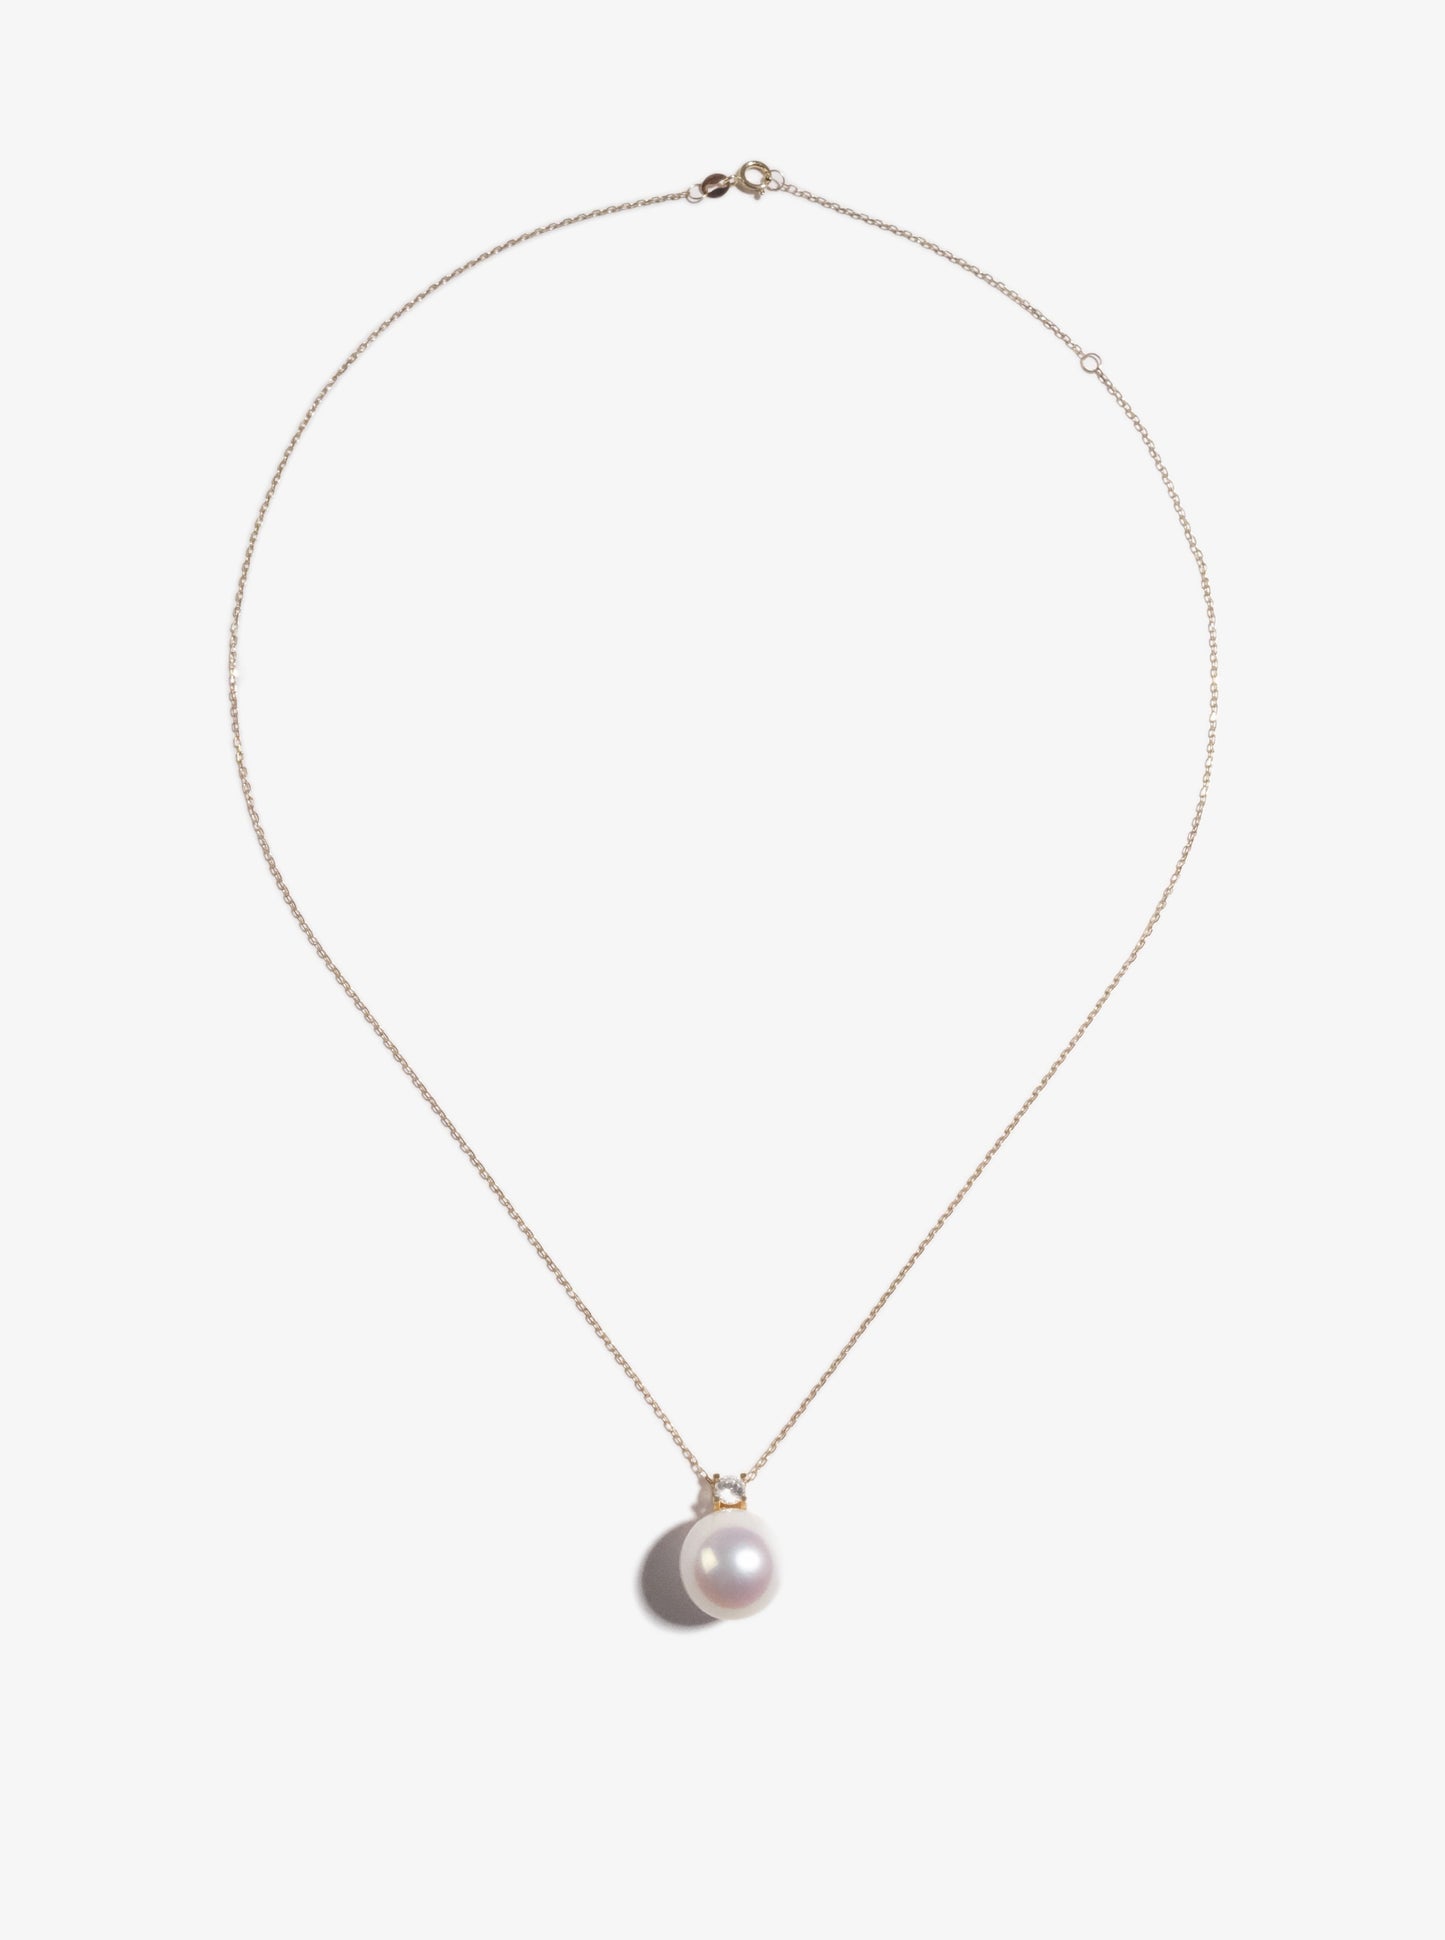 Freshwater Pearl Pendant With 18K Gold  FP18K33